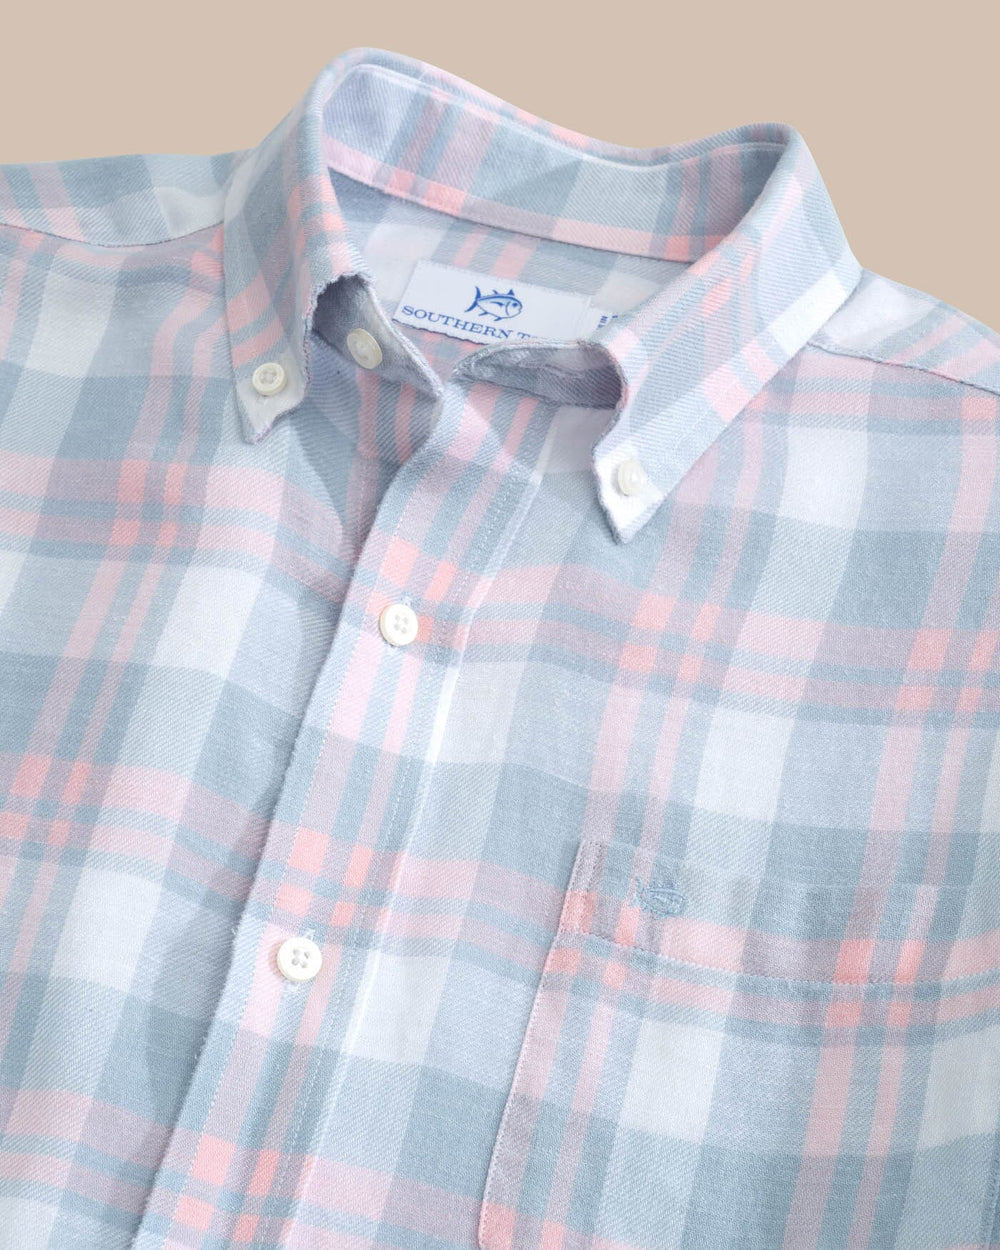 The detail view of the Southern Tide Headland Reedy Plaid Long Sleeve Sport Shirt by Southern Tide - Tsunami Grey